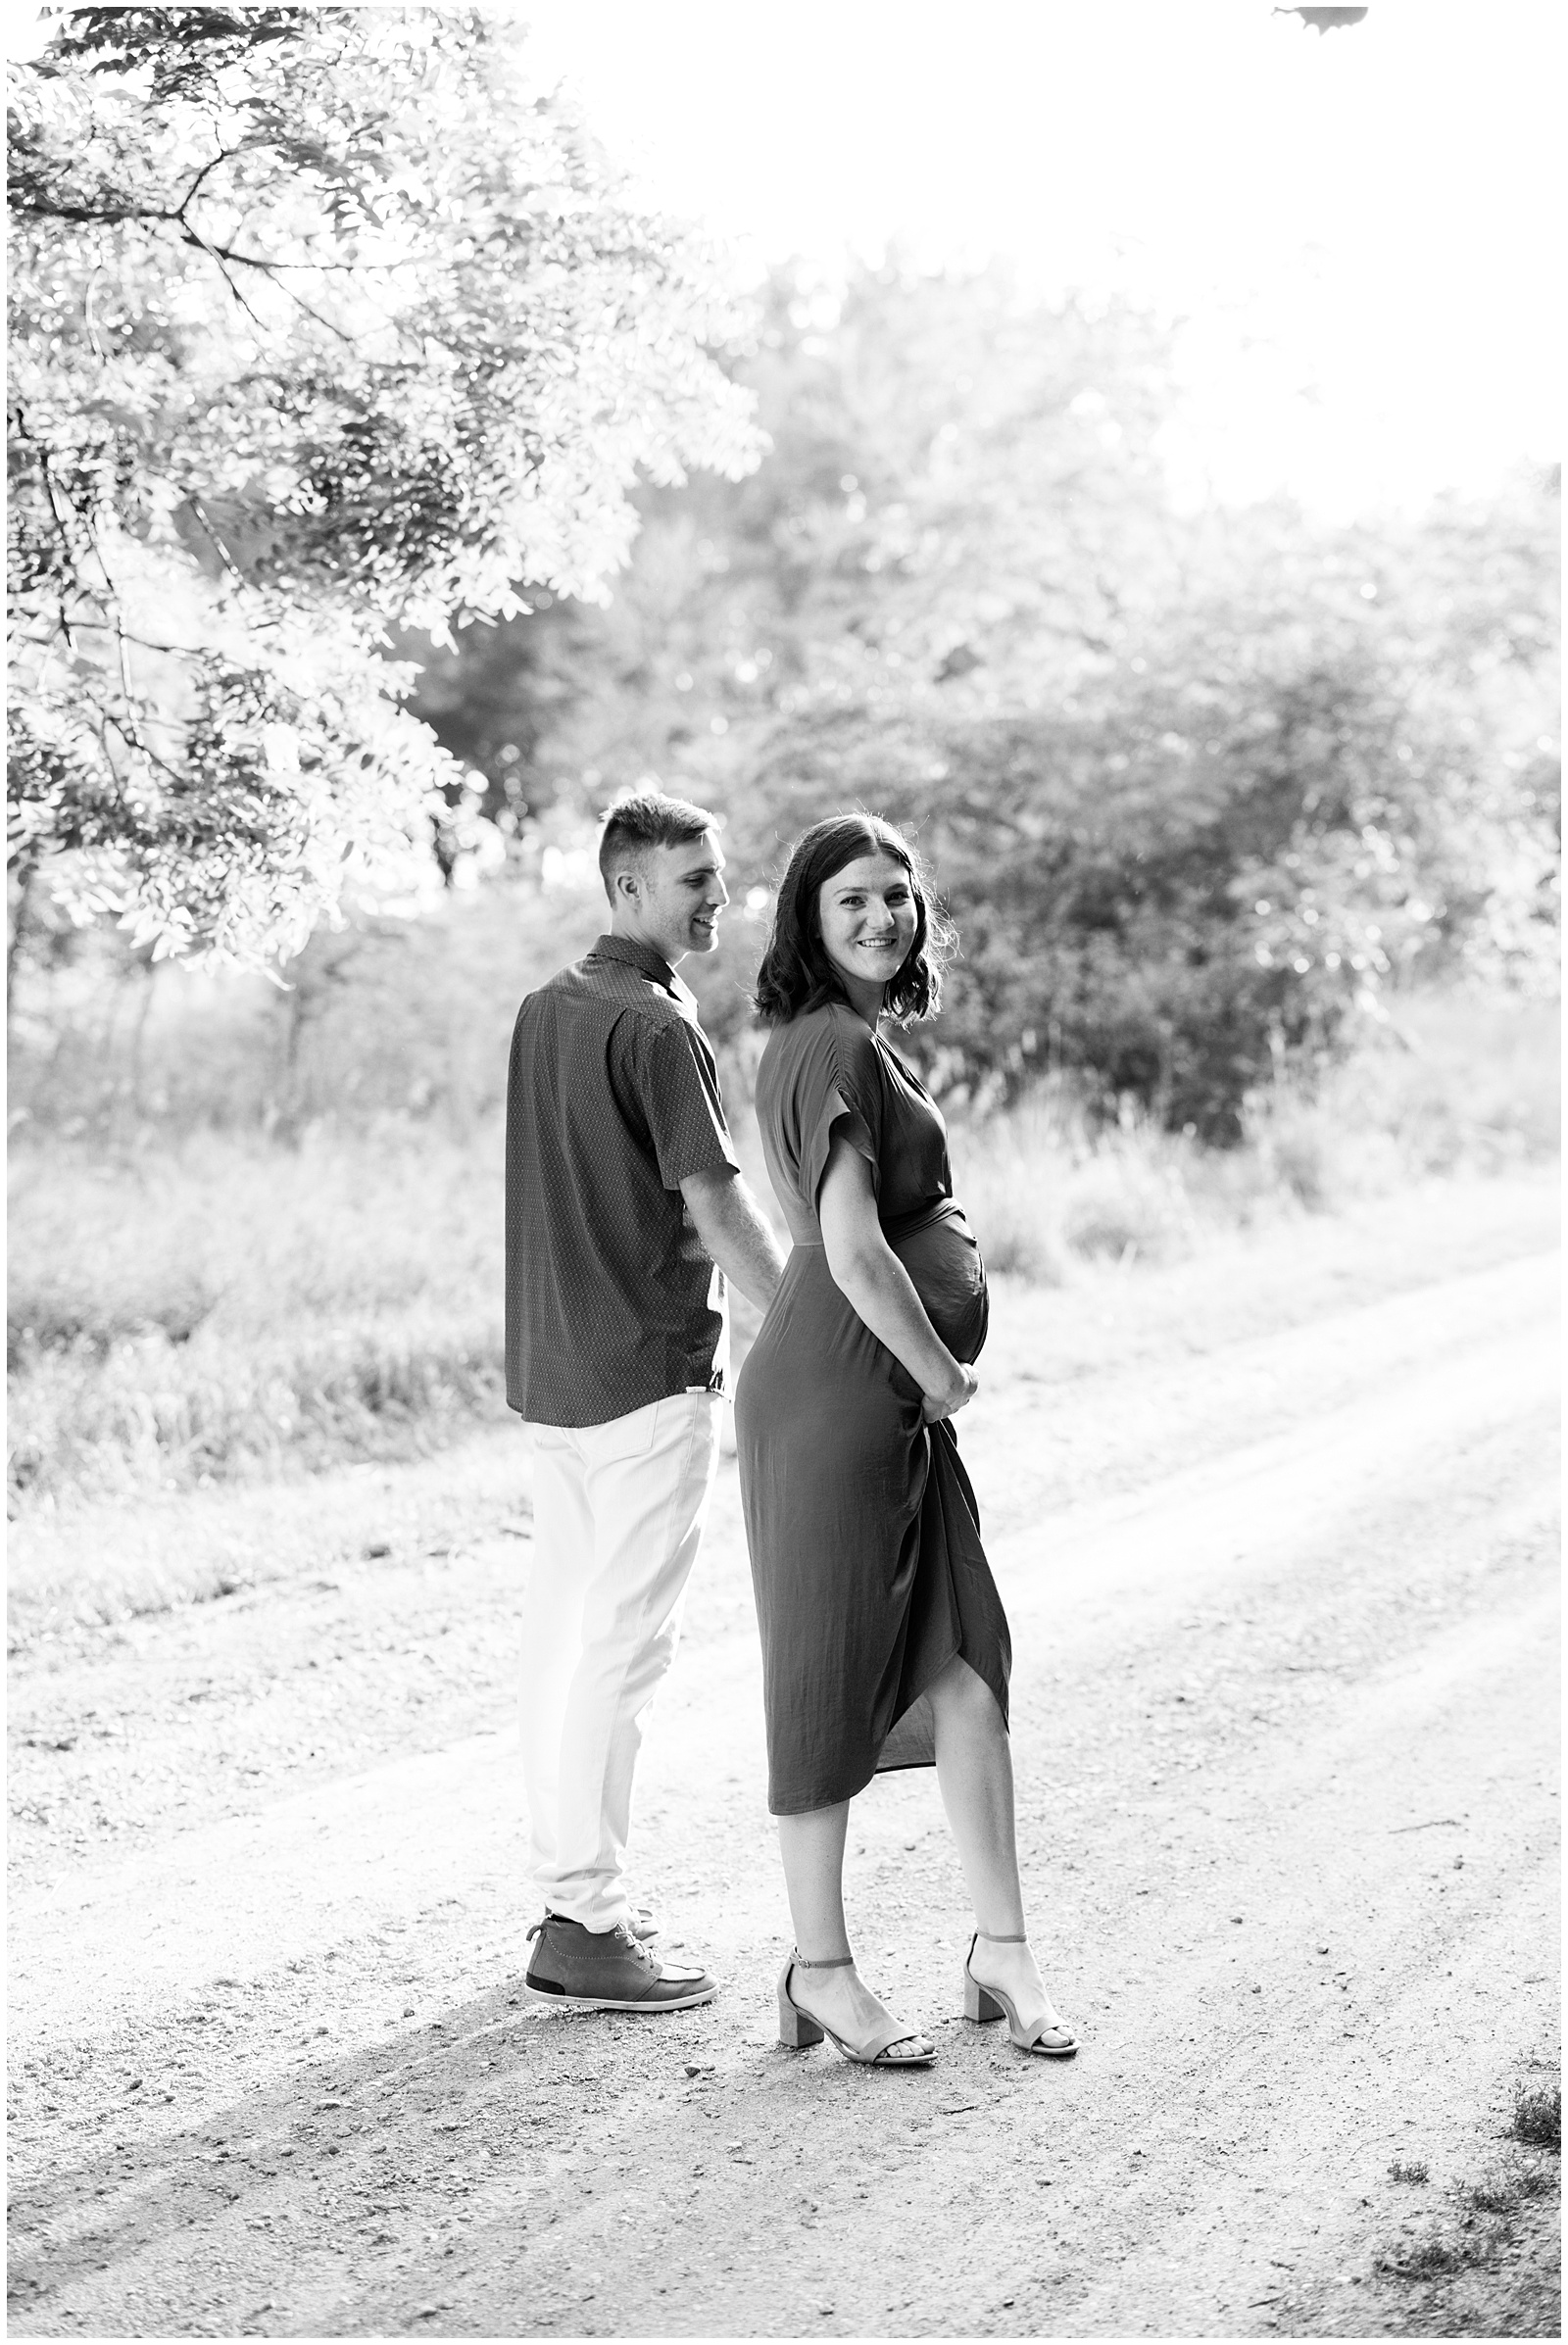 Sioux City Maternity Session,Sioux city maternity photographer,iowa maternity photographer,iowa maternity session,sioux city maternity,sioux city photographer,sioux city pregnancy photographer,